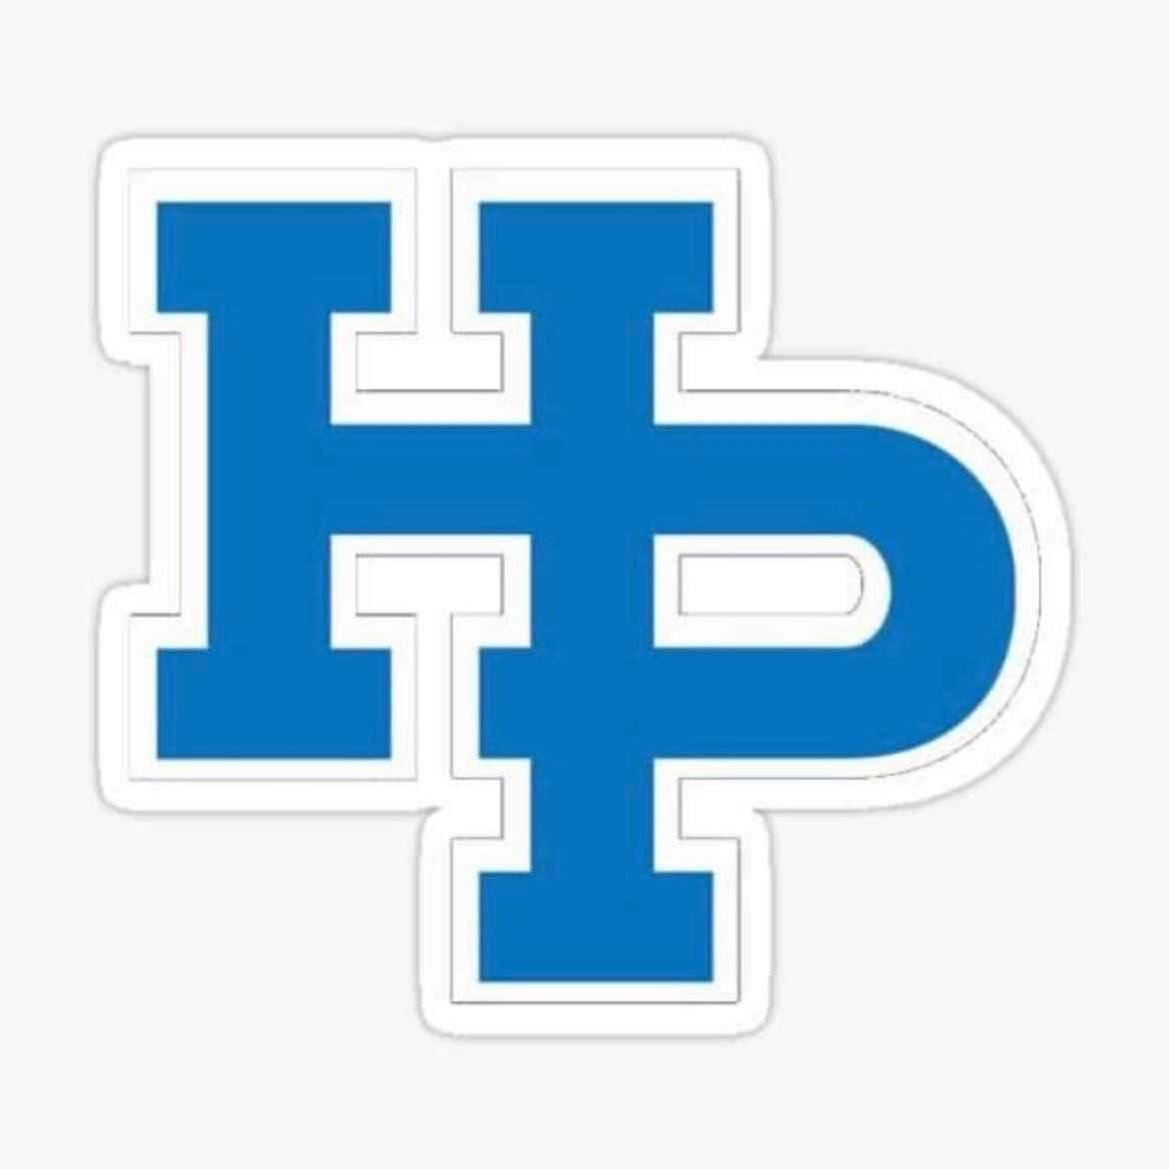 Many of our players, coaches and families live in and around Highland Park. Our thoughts are with them and our loved ones in the HP community. #hpstrong